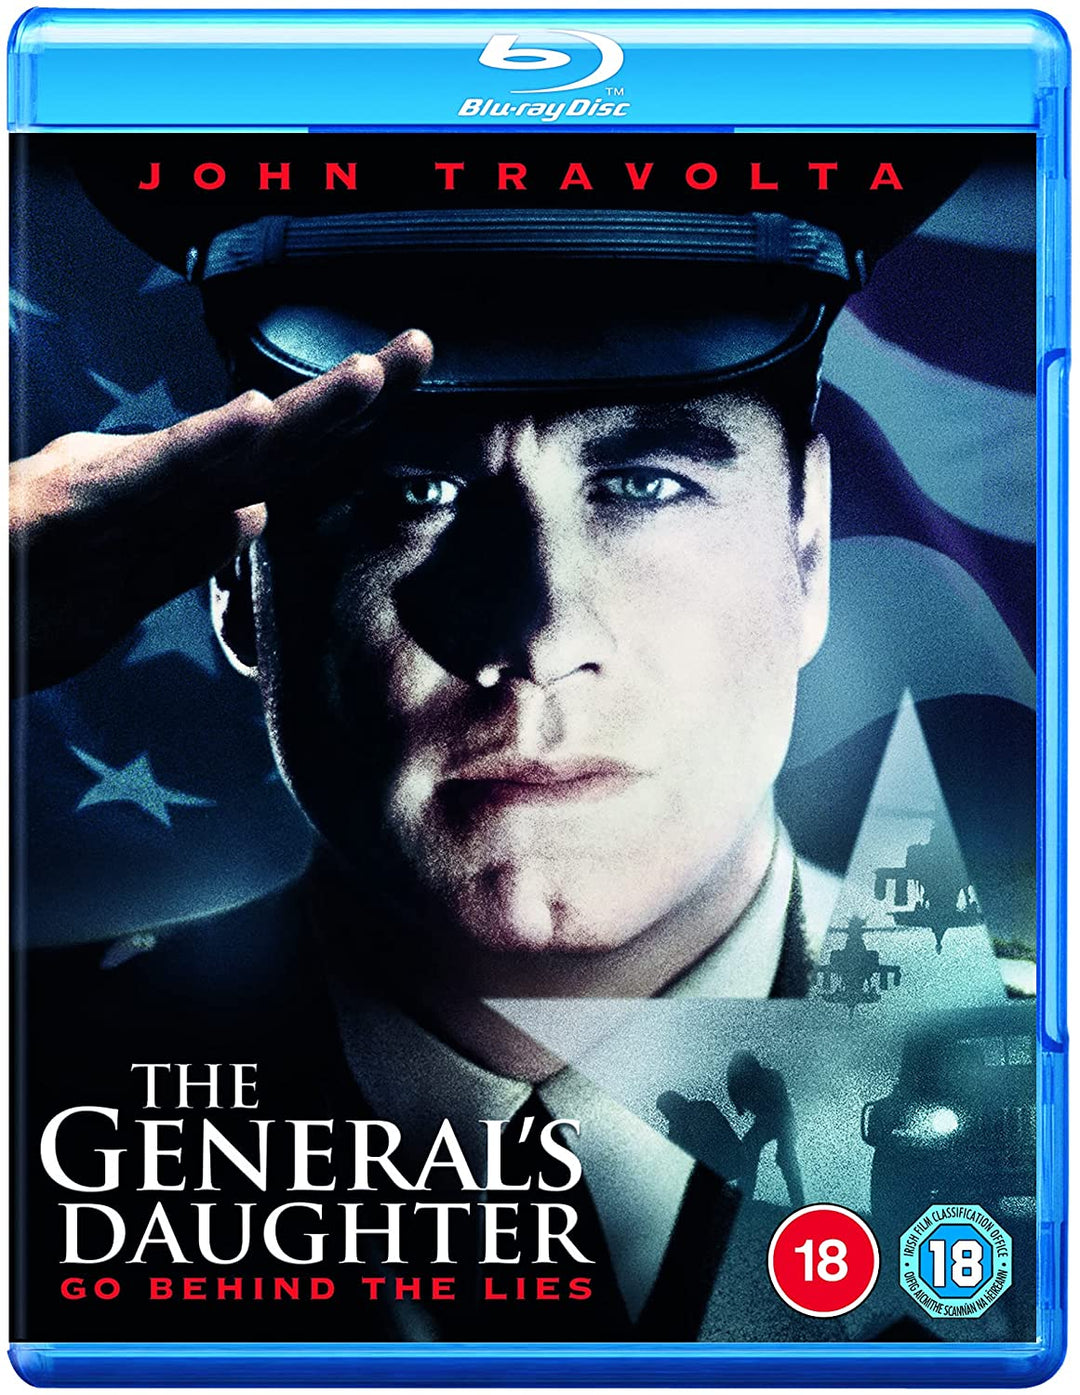 The General's Daughter [Blu-ray]